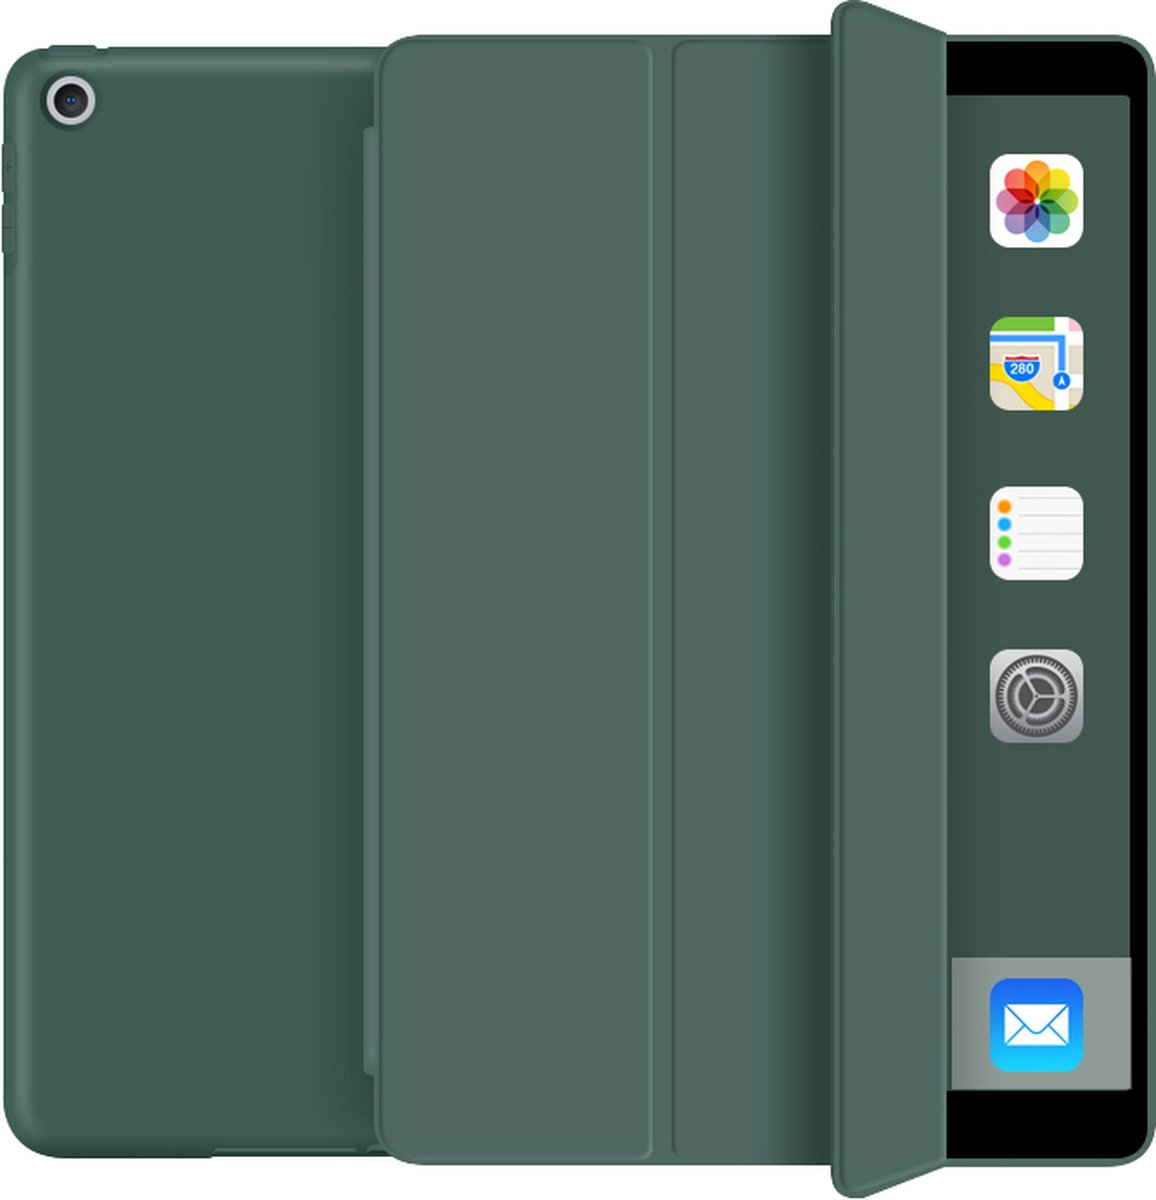 Hoes geschikt voor iPad 2019/2020/2021 -– Groen - 10.2 Inch Ipad 7/8/9 Soft Silicone Magnetische Smart Folio Book Case -papierachtig - Apple - iPad 7 – iPad 8 - iPad Hoesje - Ipad Case - Ipad Hoes - Autowake - Tri-fold - Tablethoes – Smartcase